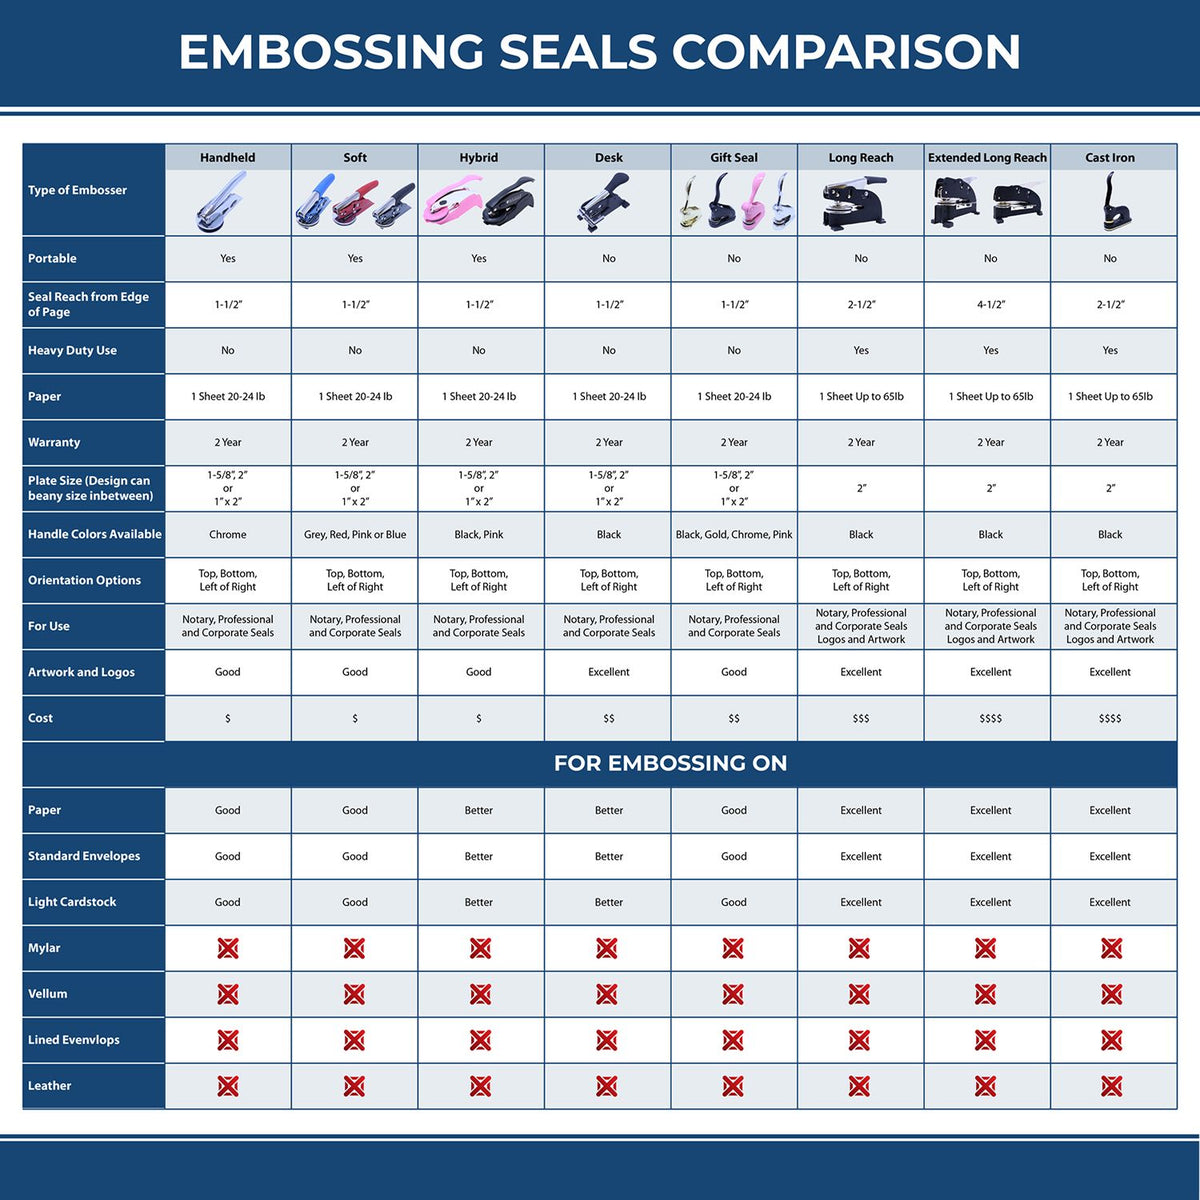 A comparison chart for the different types of mount models available for the Handheld Alaska Land Surveyor Seal.